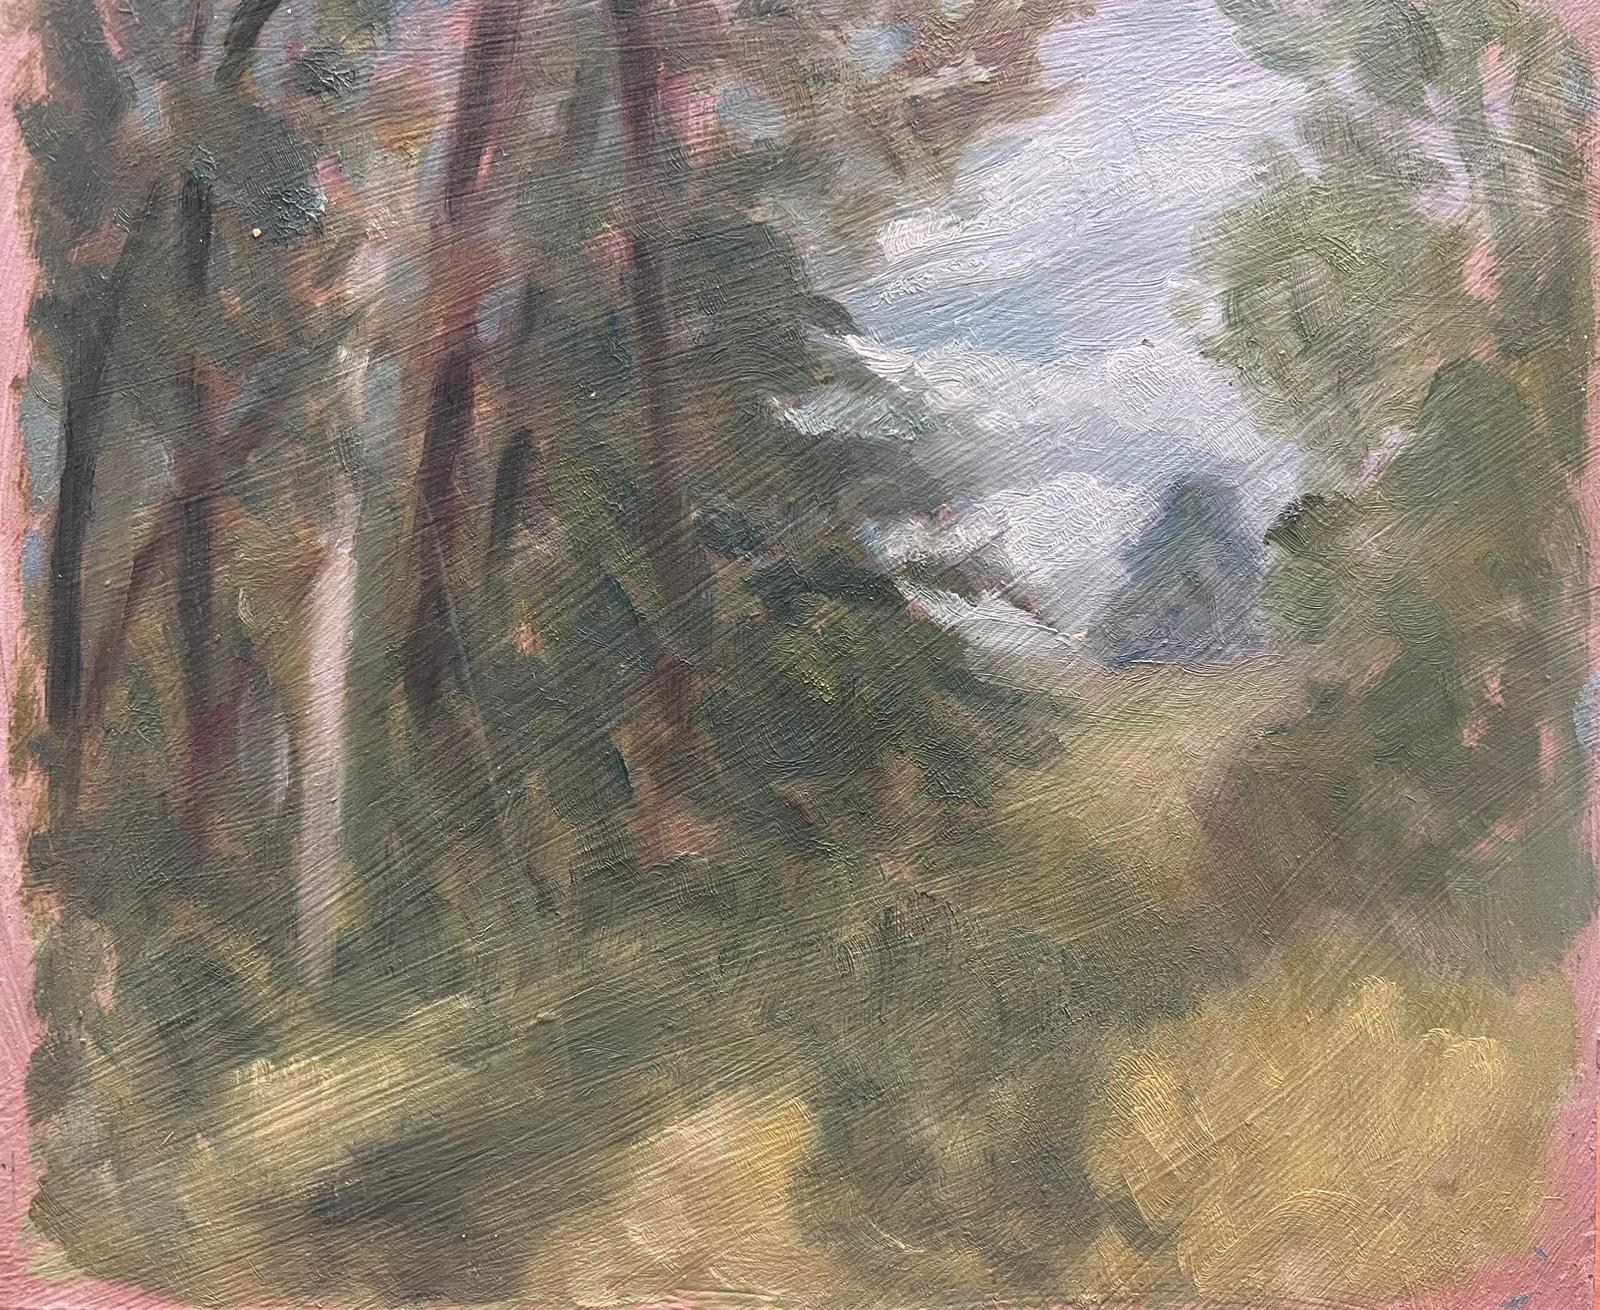 Geza Somerset-Paddon Landscape Painting - Blurred Clouds Through Gree Trees Contemporary British Oil Painting